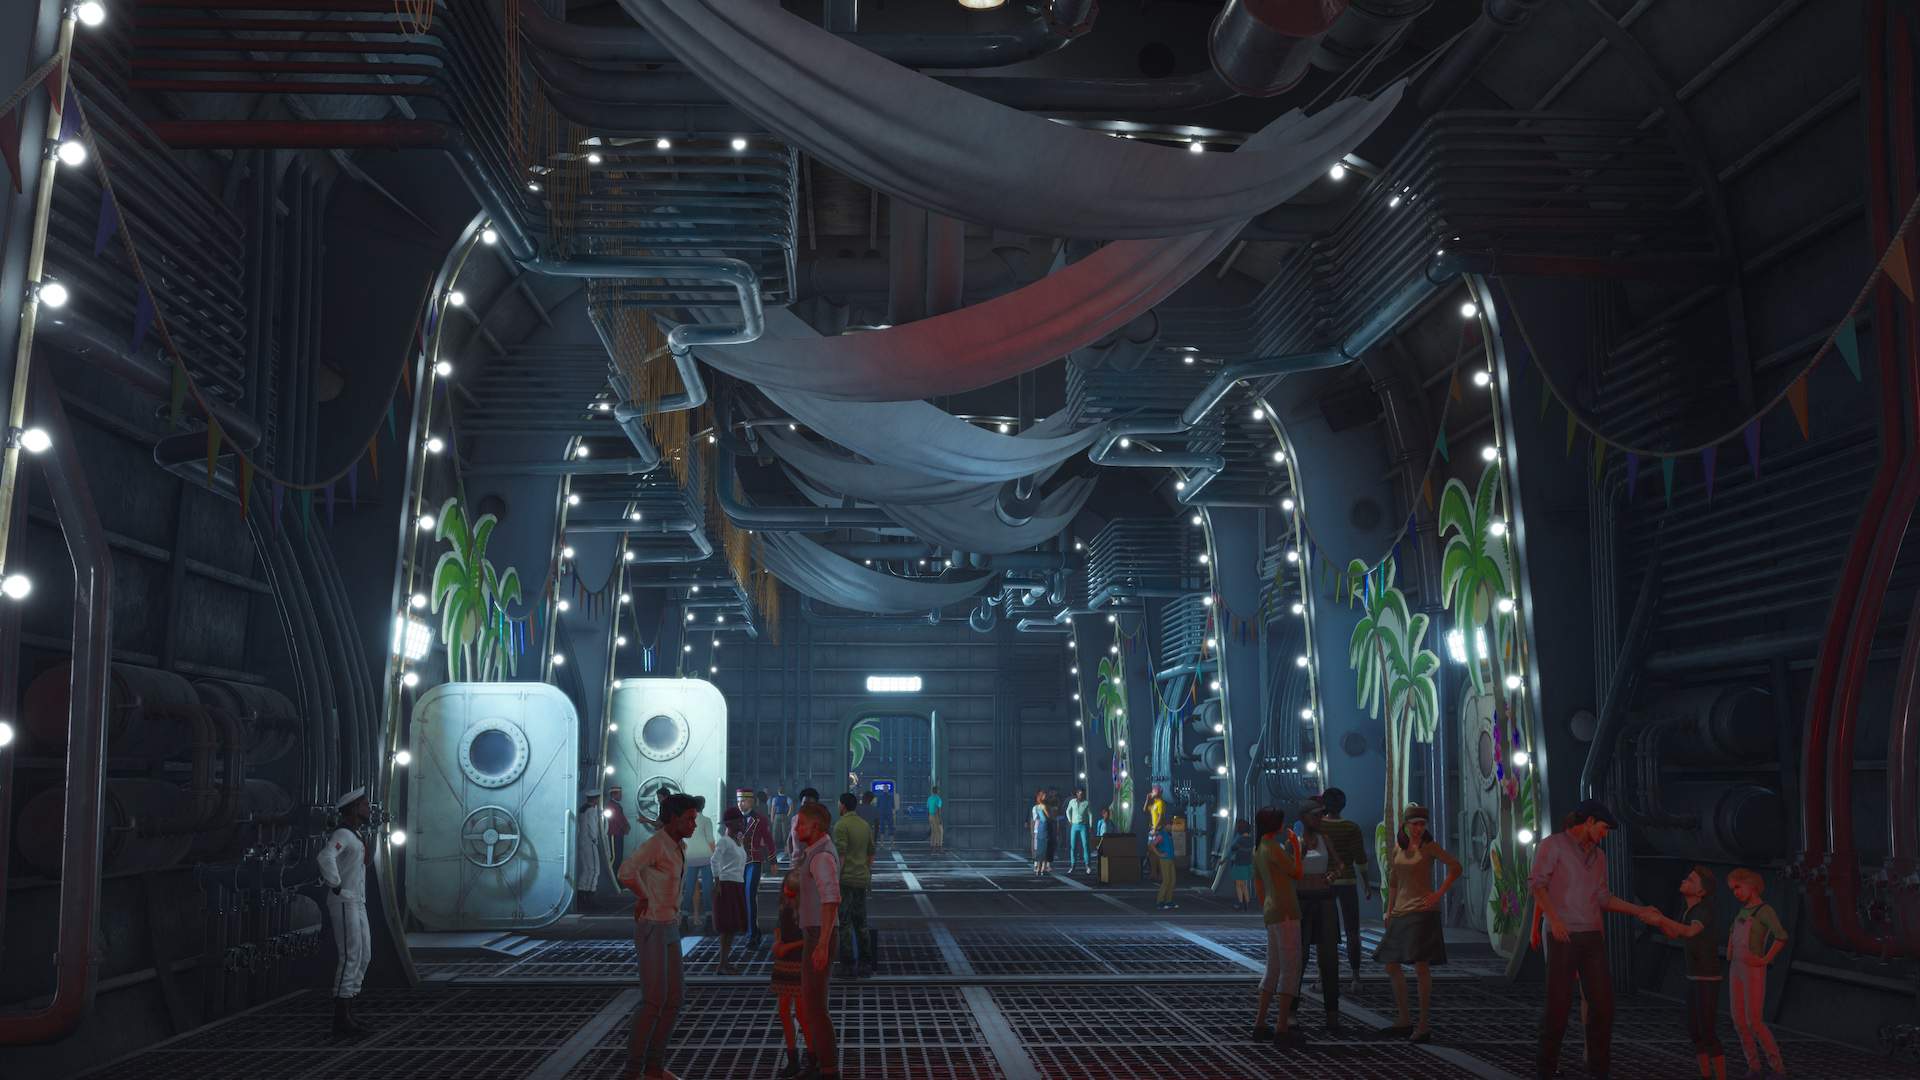 The interior of a large ship. Streamers and tropical decorations are up and people are milling about.